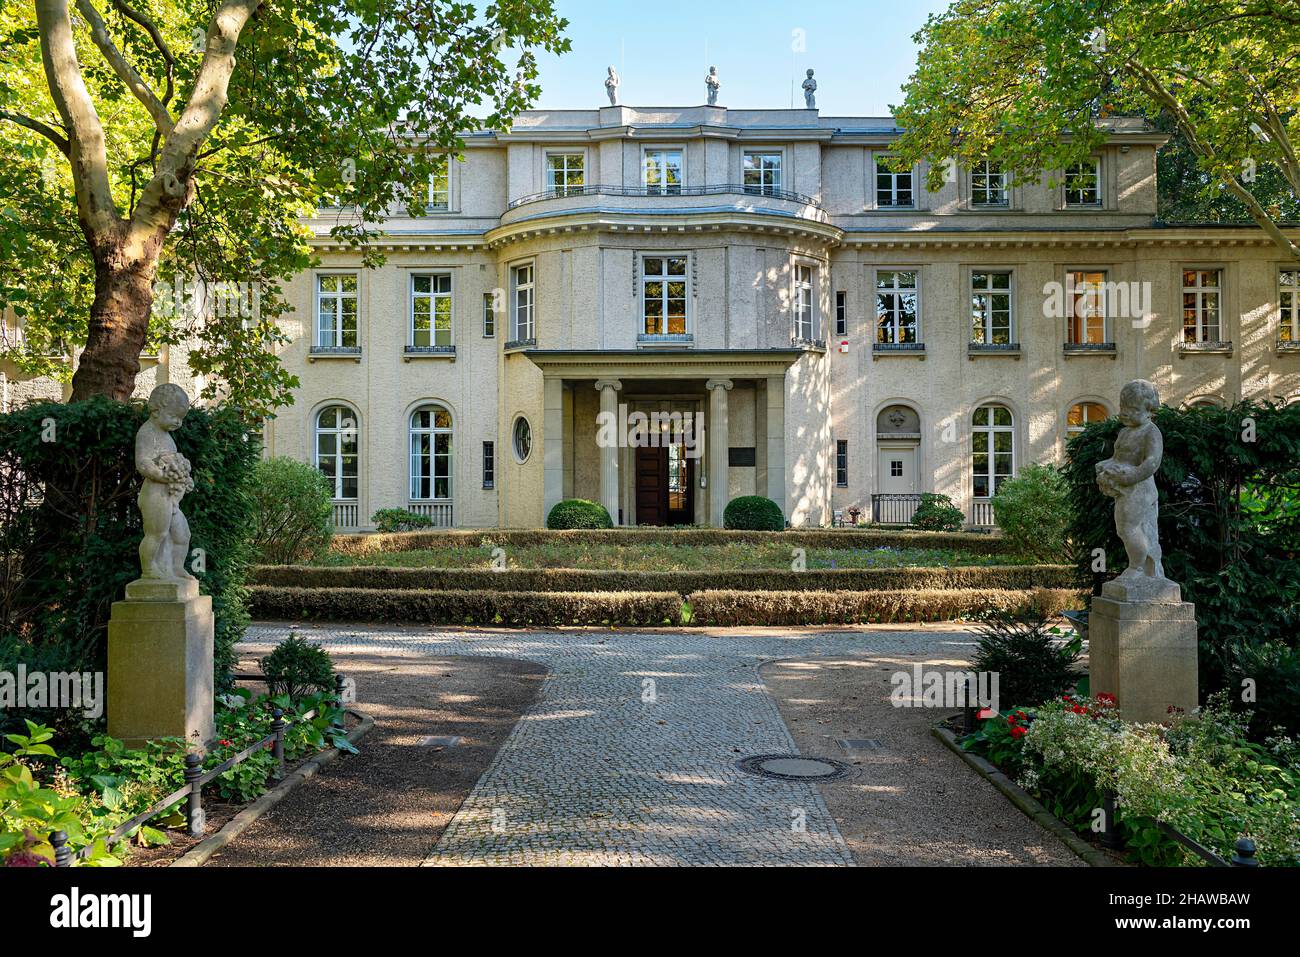 Villa of the infamous Wannsee Conference on the Great Wannsee, Berlin-Potsdam, Germany Stock Photo